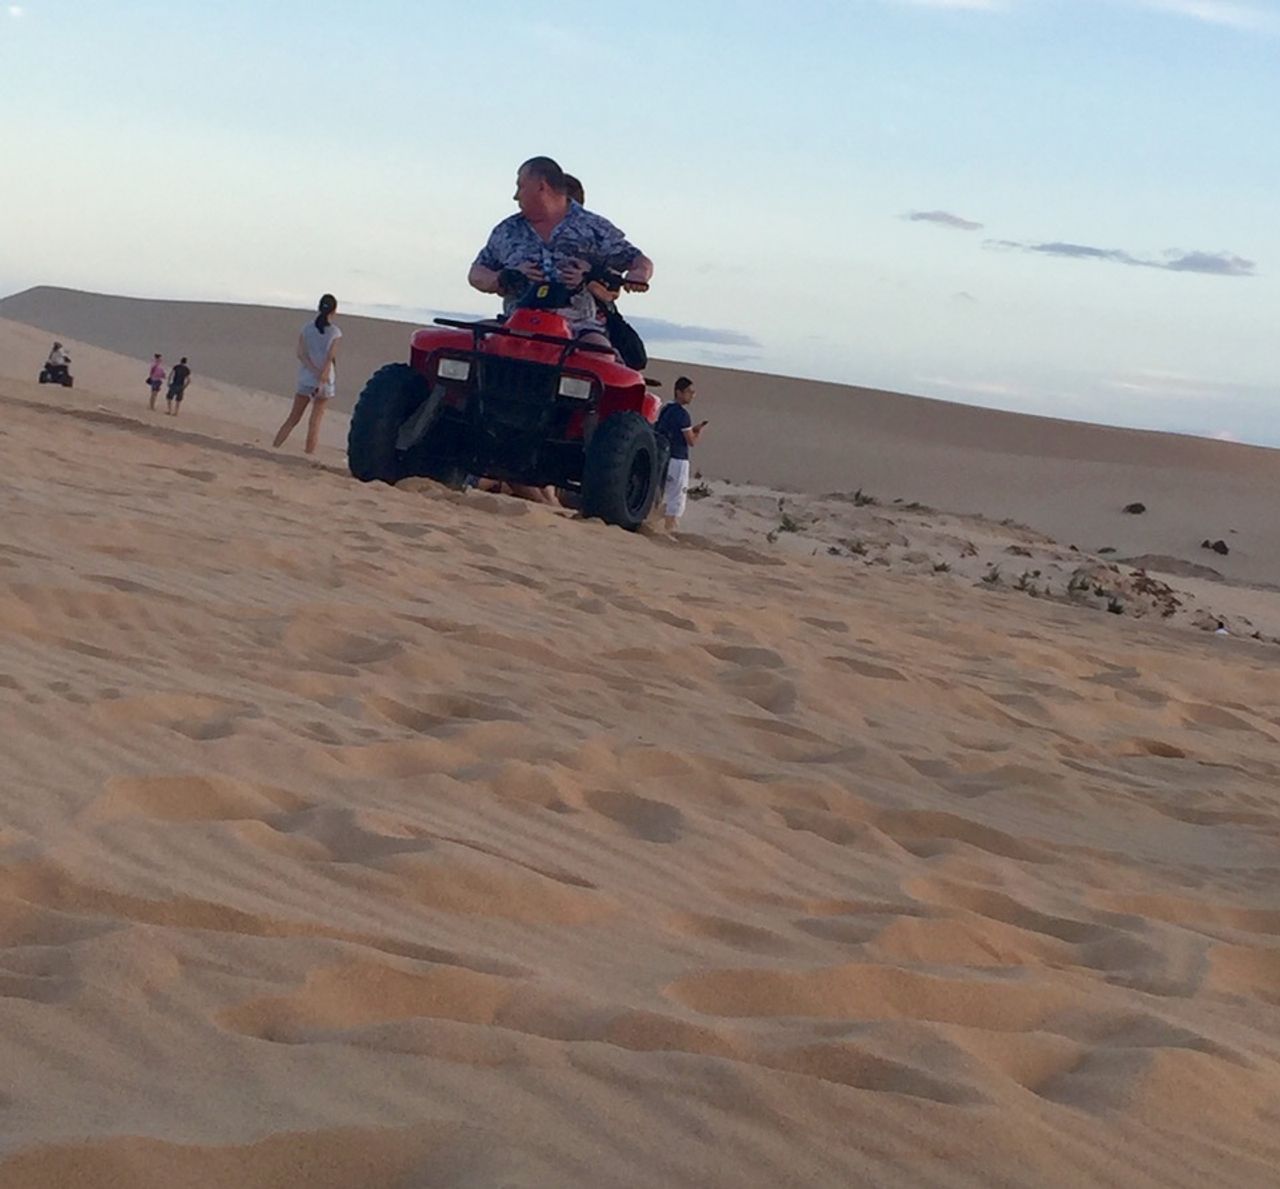 Old couple on a dune buggy in the sand.